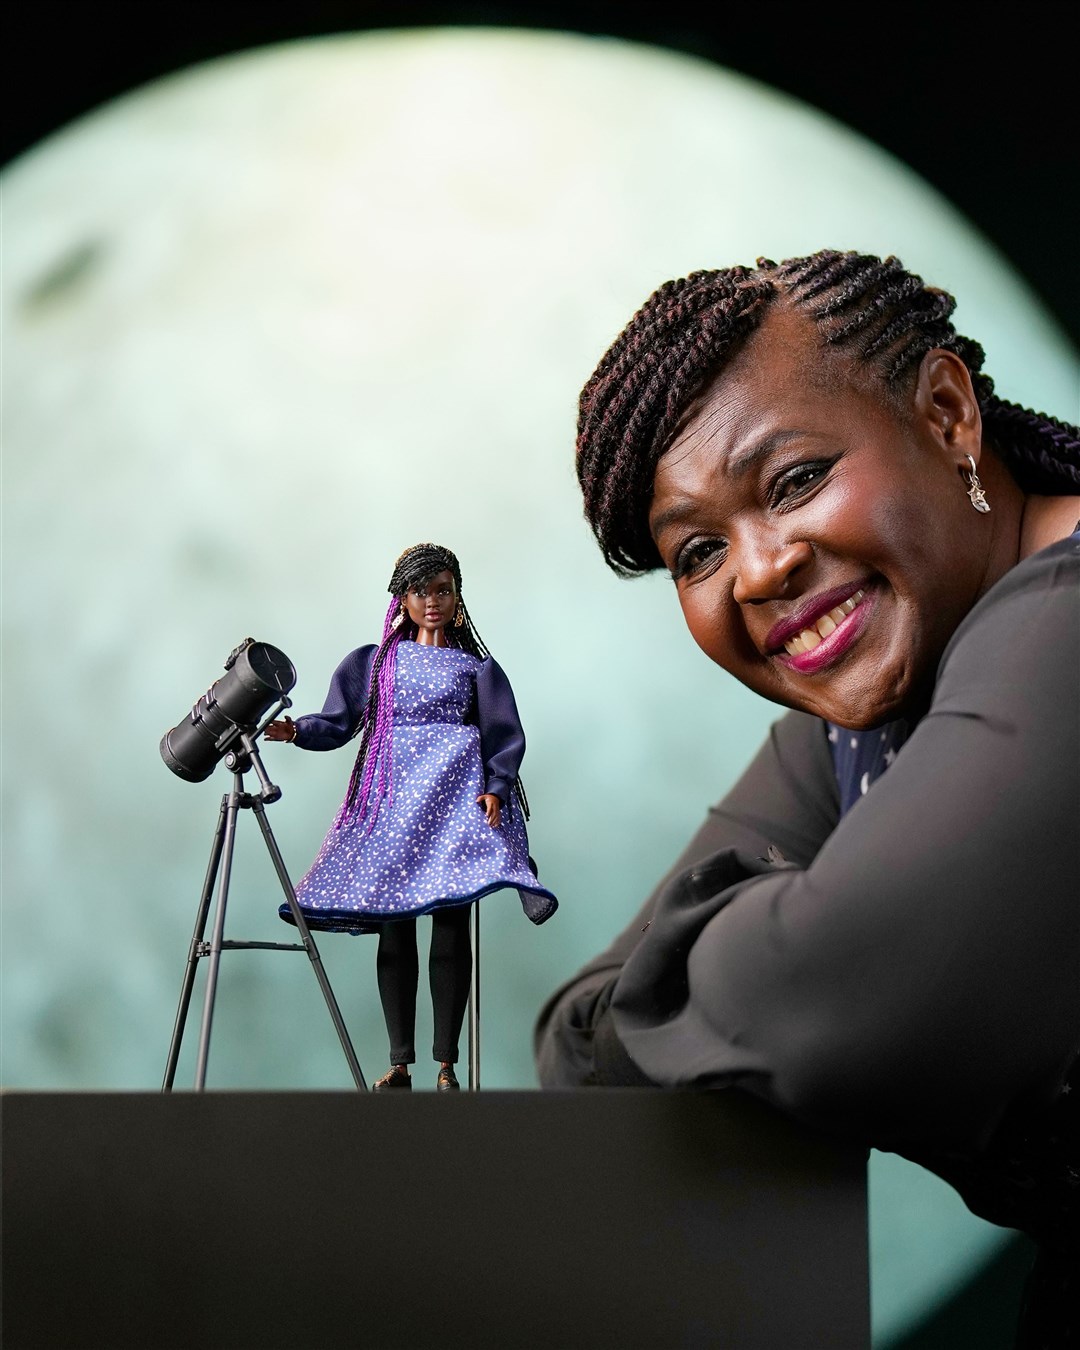 Dr Maggie Aderin-Pocock’s Barbie doll has its own telescope, a nod to her work with the James Webb Space Telescope (Mattel/PA)